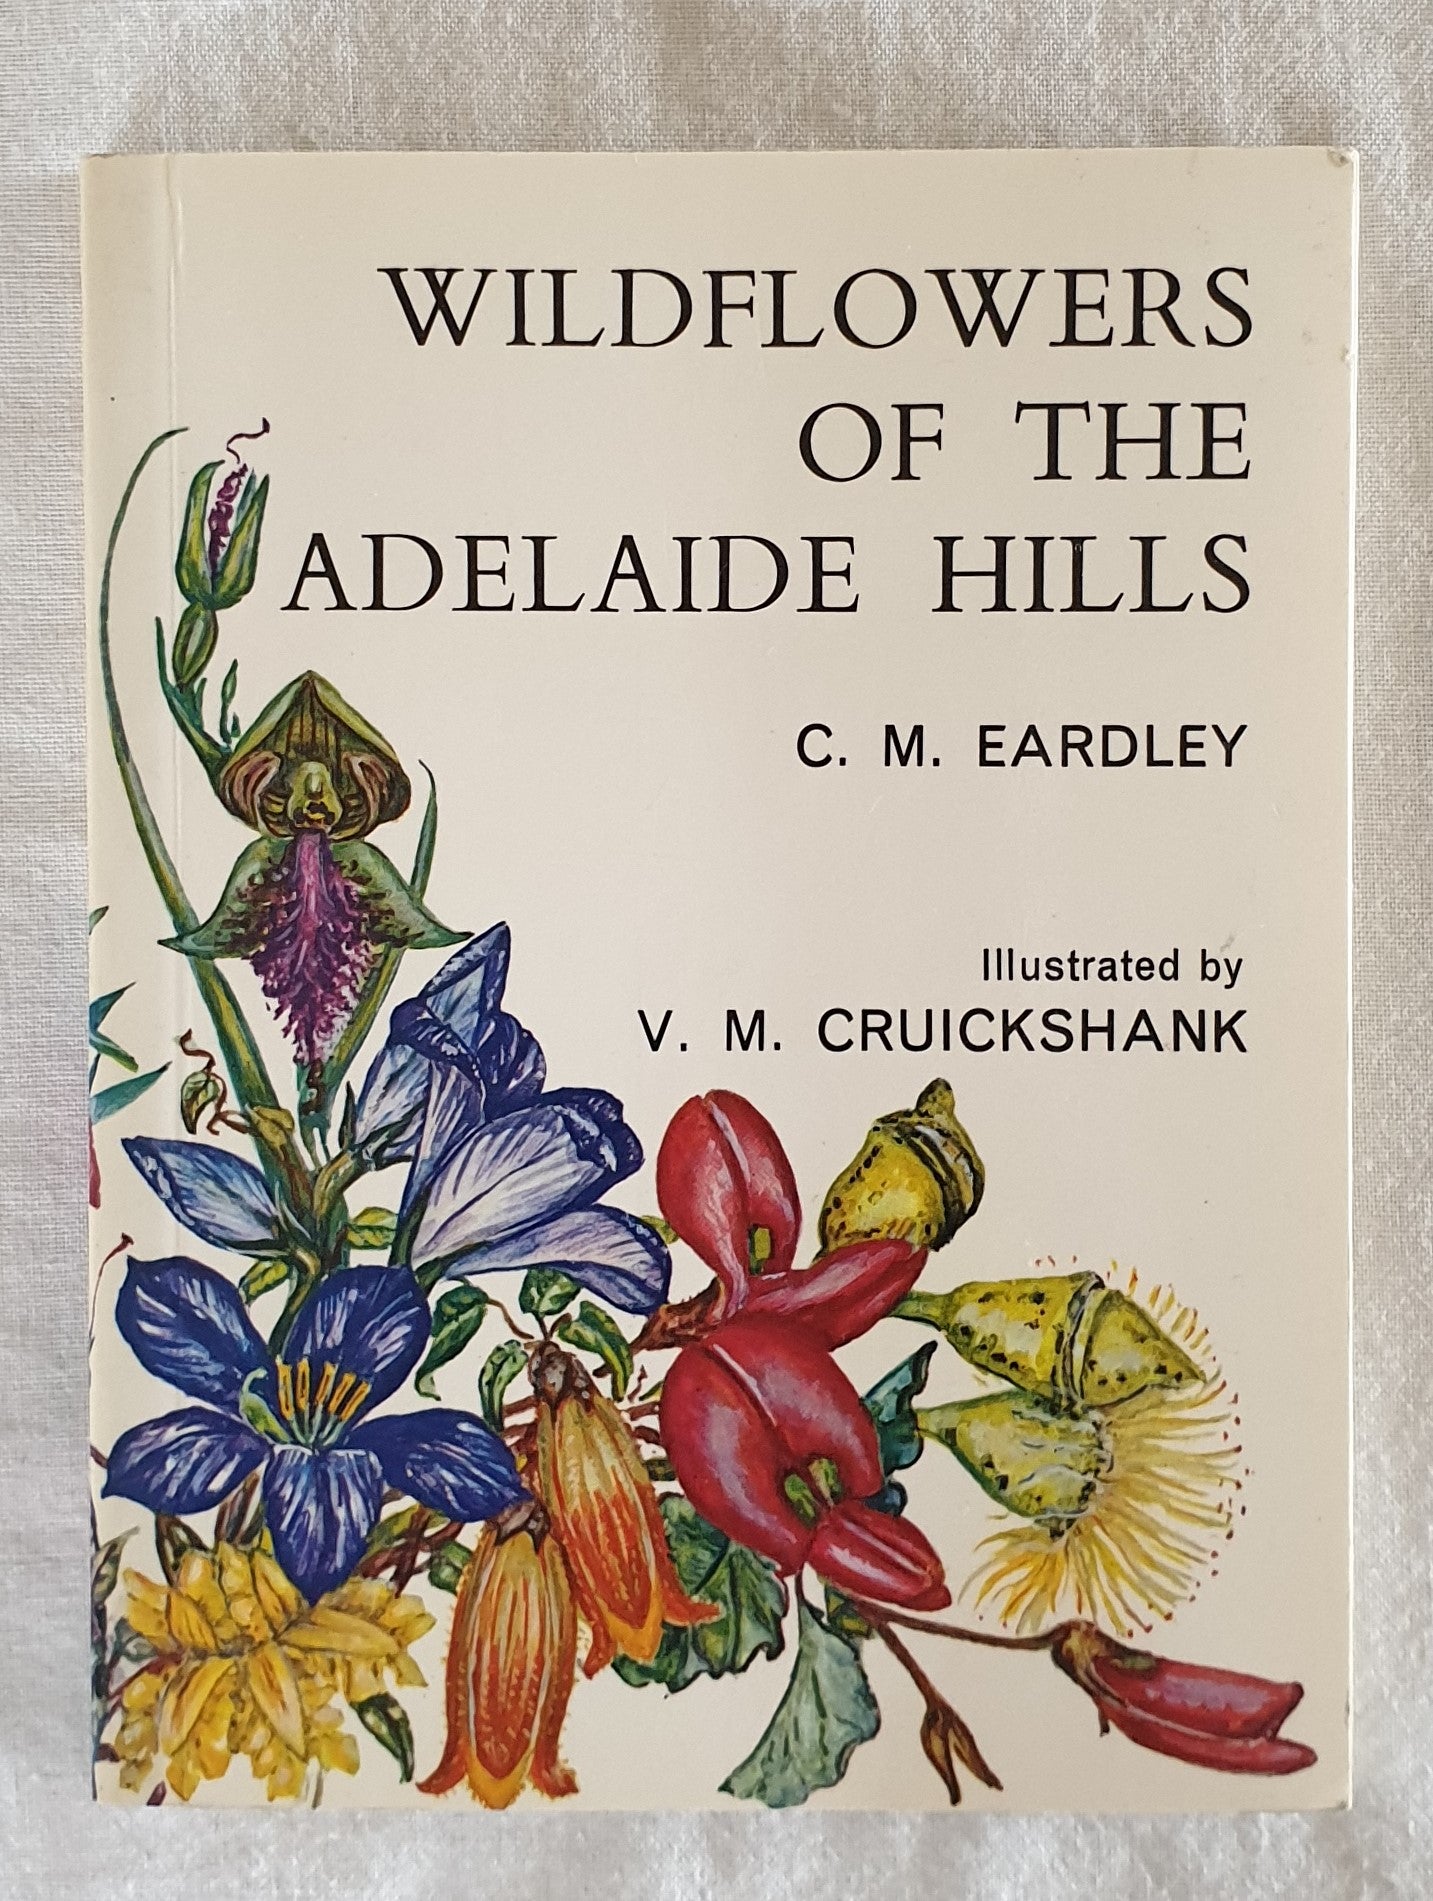 Wildflowers of the Adelaide Hills by C. M. Eardley